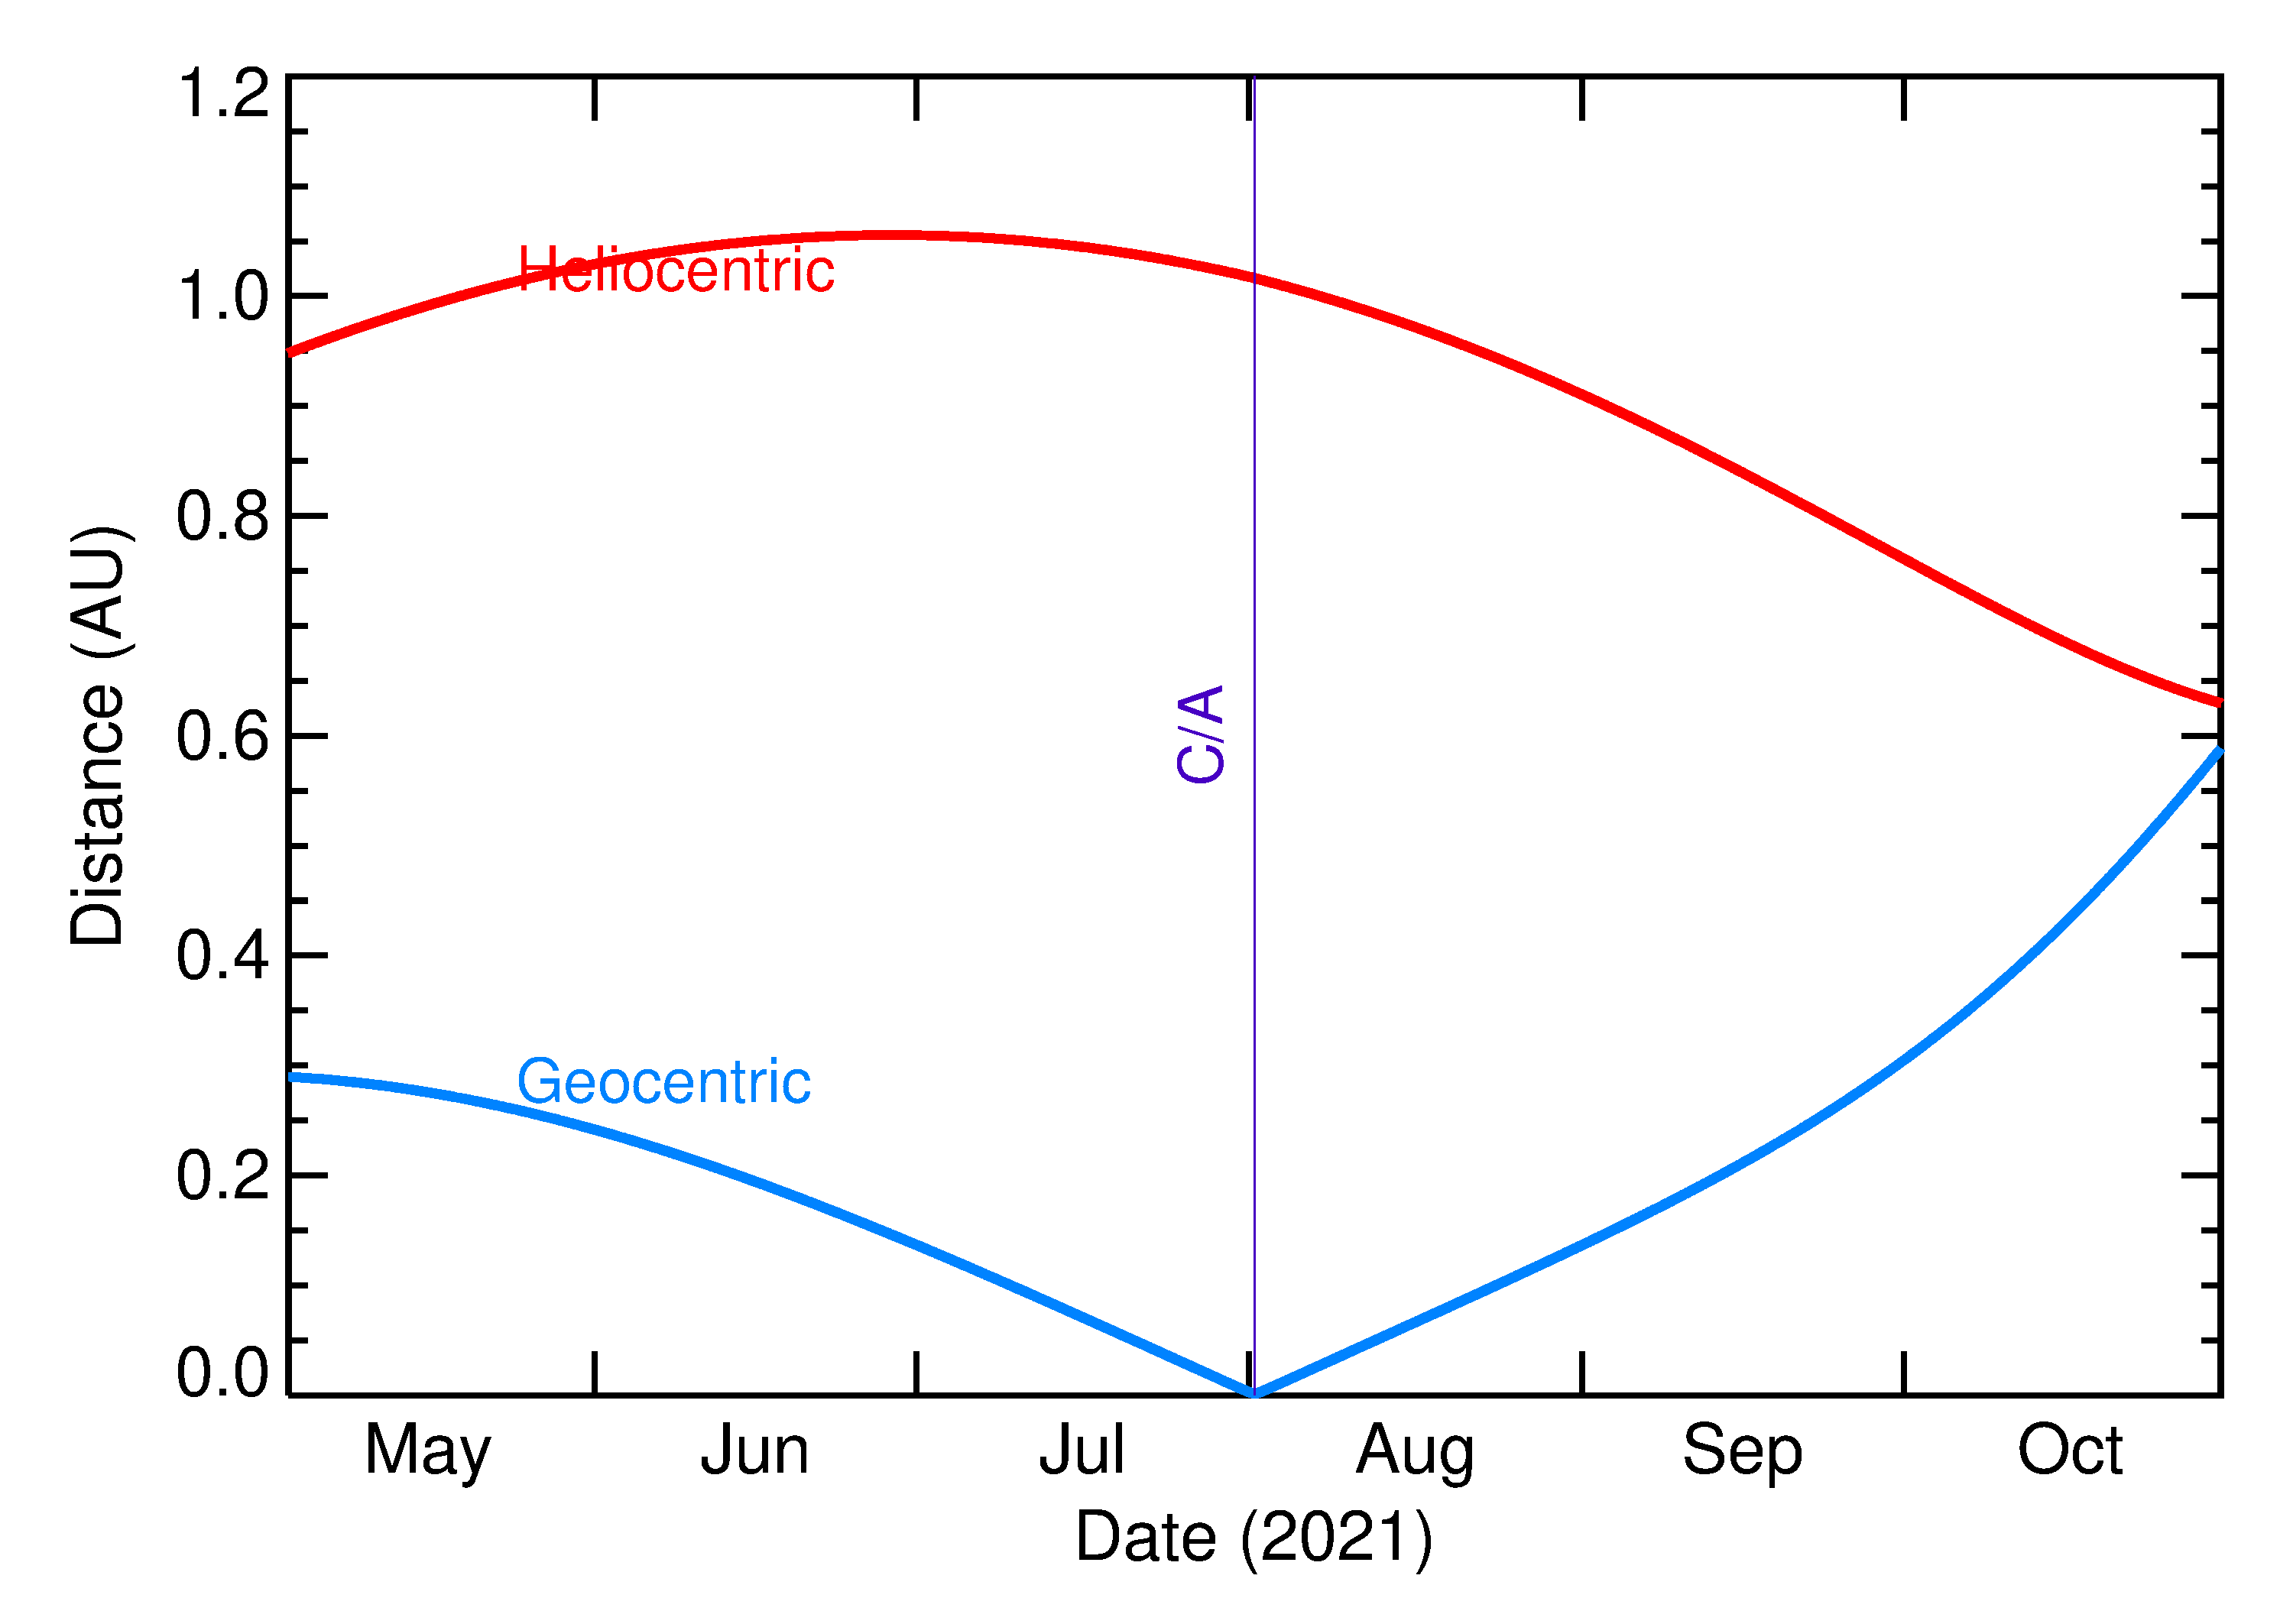 Heliocentric and Geocentric Distances of 2021 OD1 in the months around closest approach